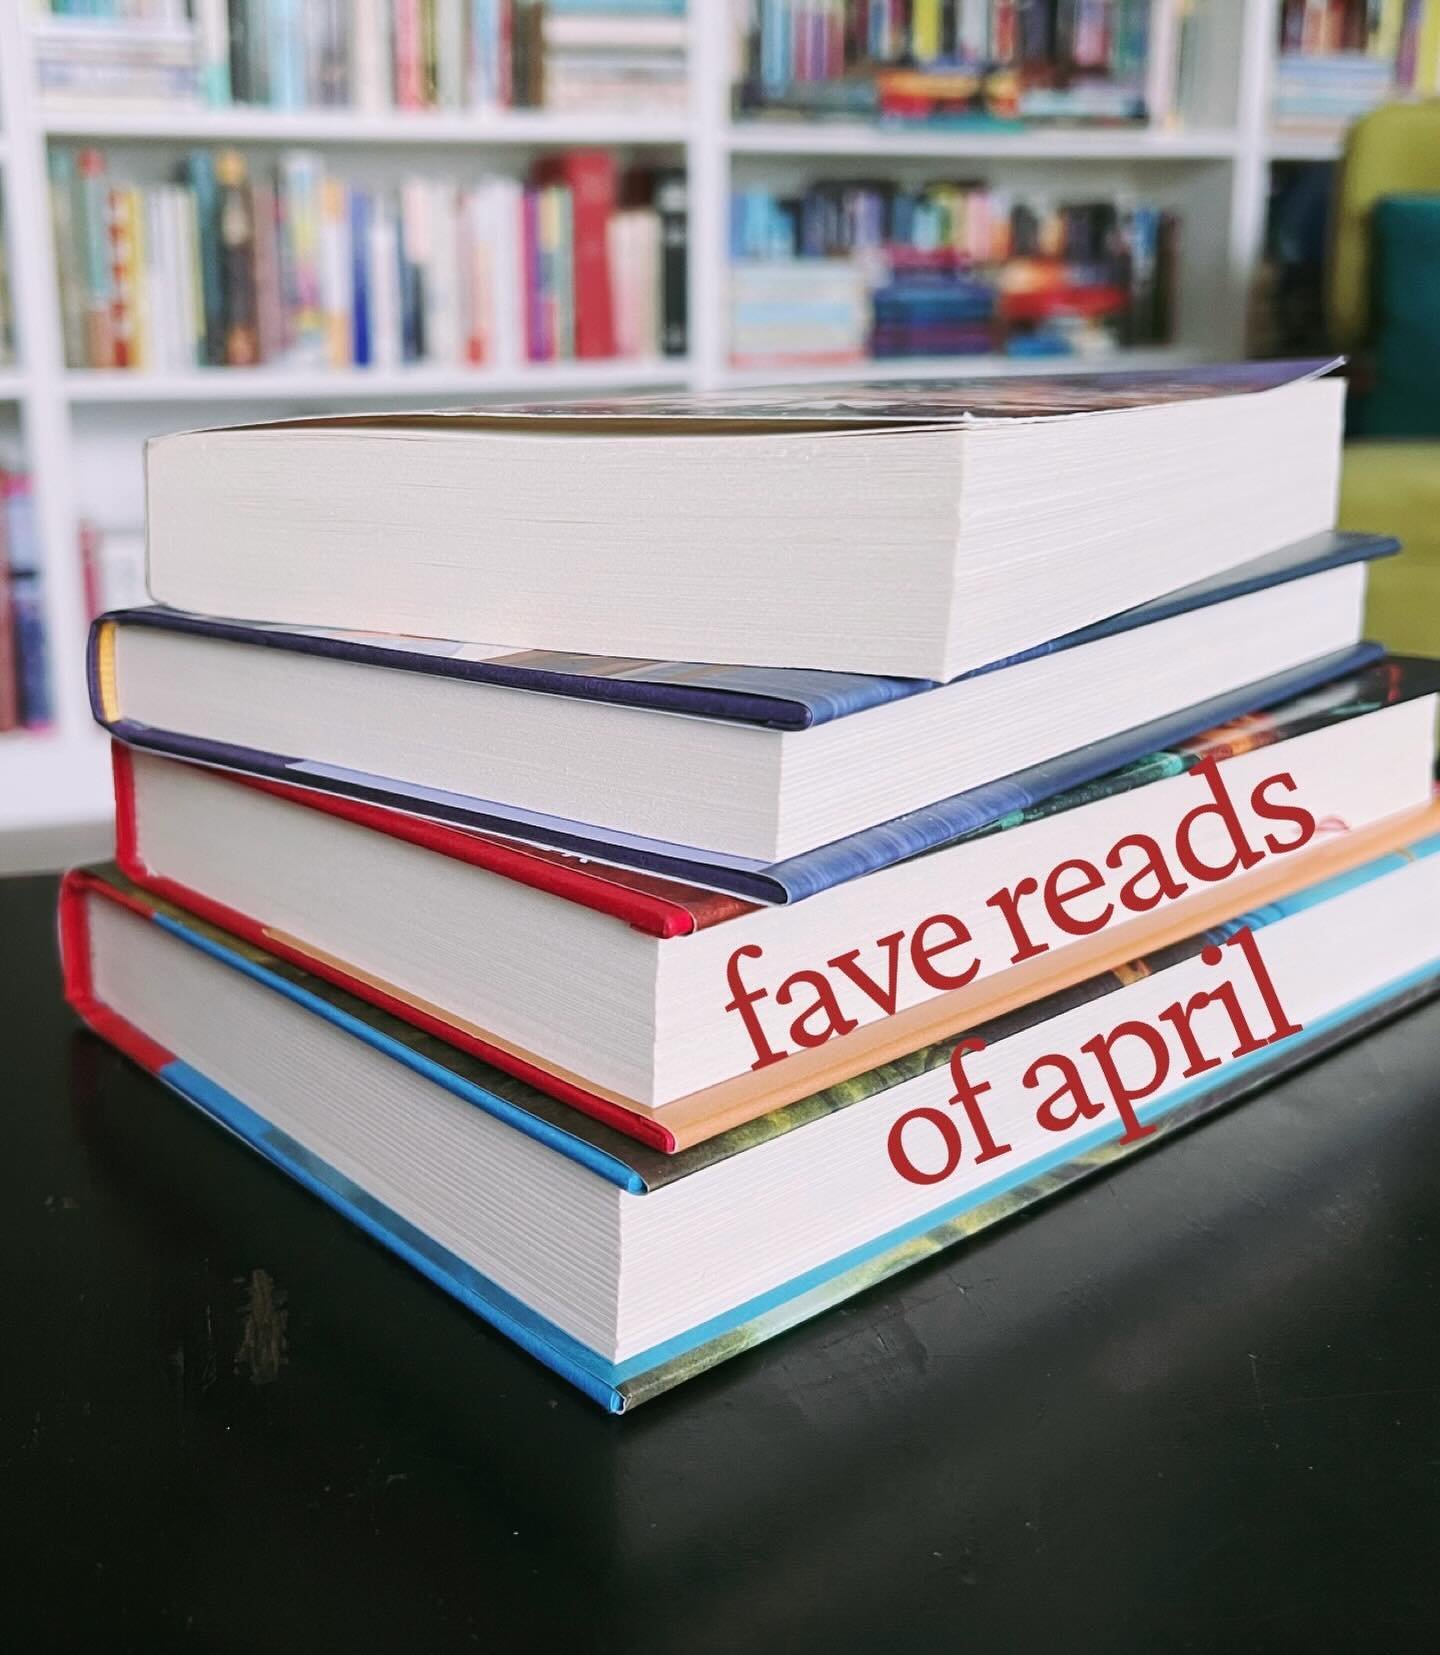 ✨💖 my favourite reads of april 💖✨
📖
🌟 A WISH IN THE DARK by @csoontornvat 
🌟 DRAGONFRUIT by @makiialucier 
🌟 BEFORE THE COFFEE GETS COLD by (@kawaguchi.coffee ; not pictured b/c it had to go back to the library ☹️)
🌟 FERRIS by kate dicamillo 
